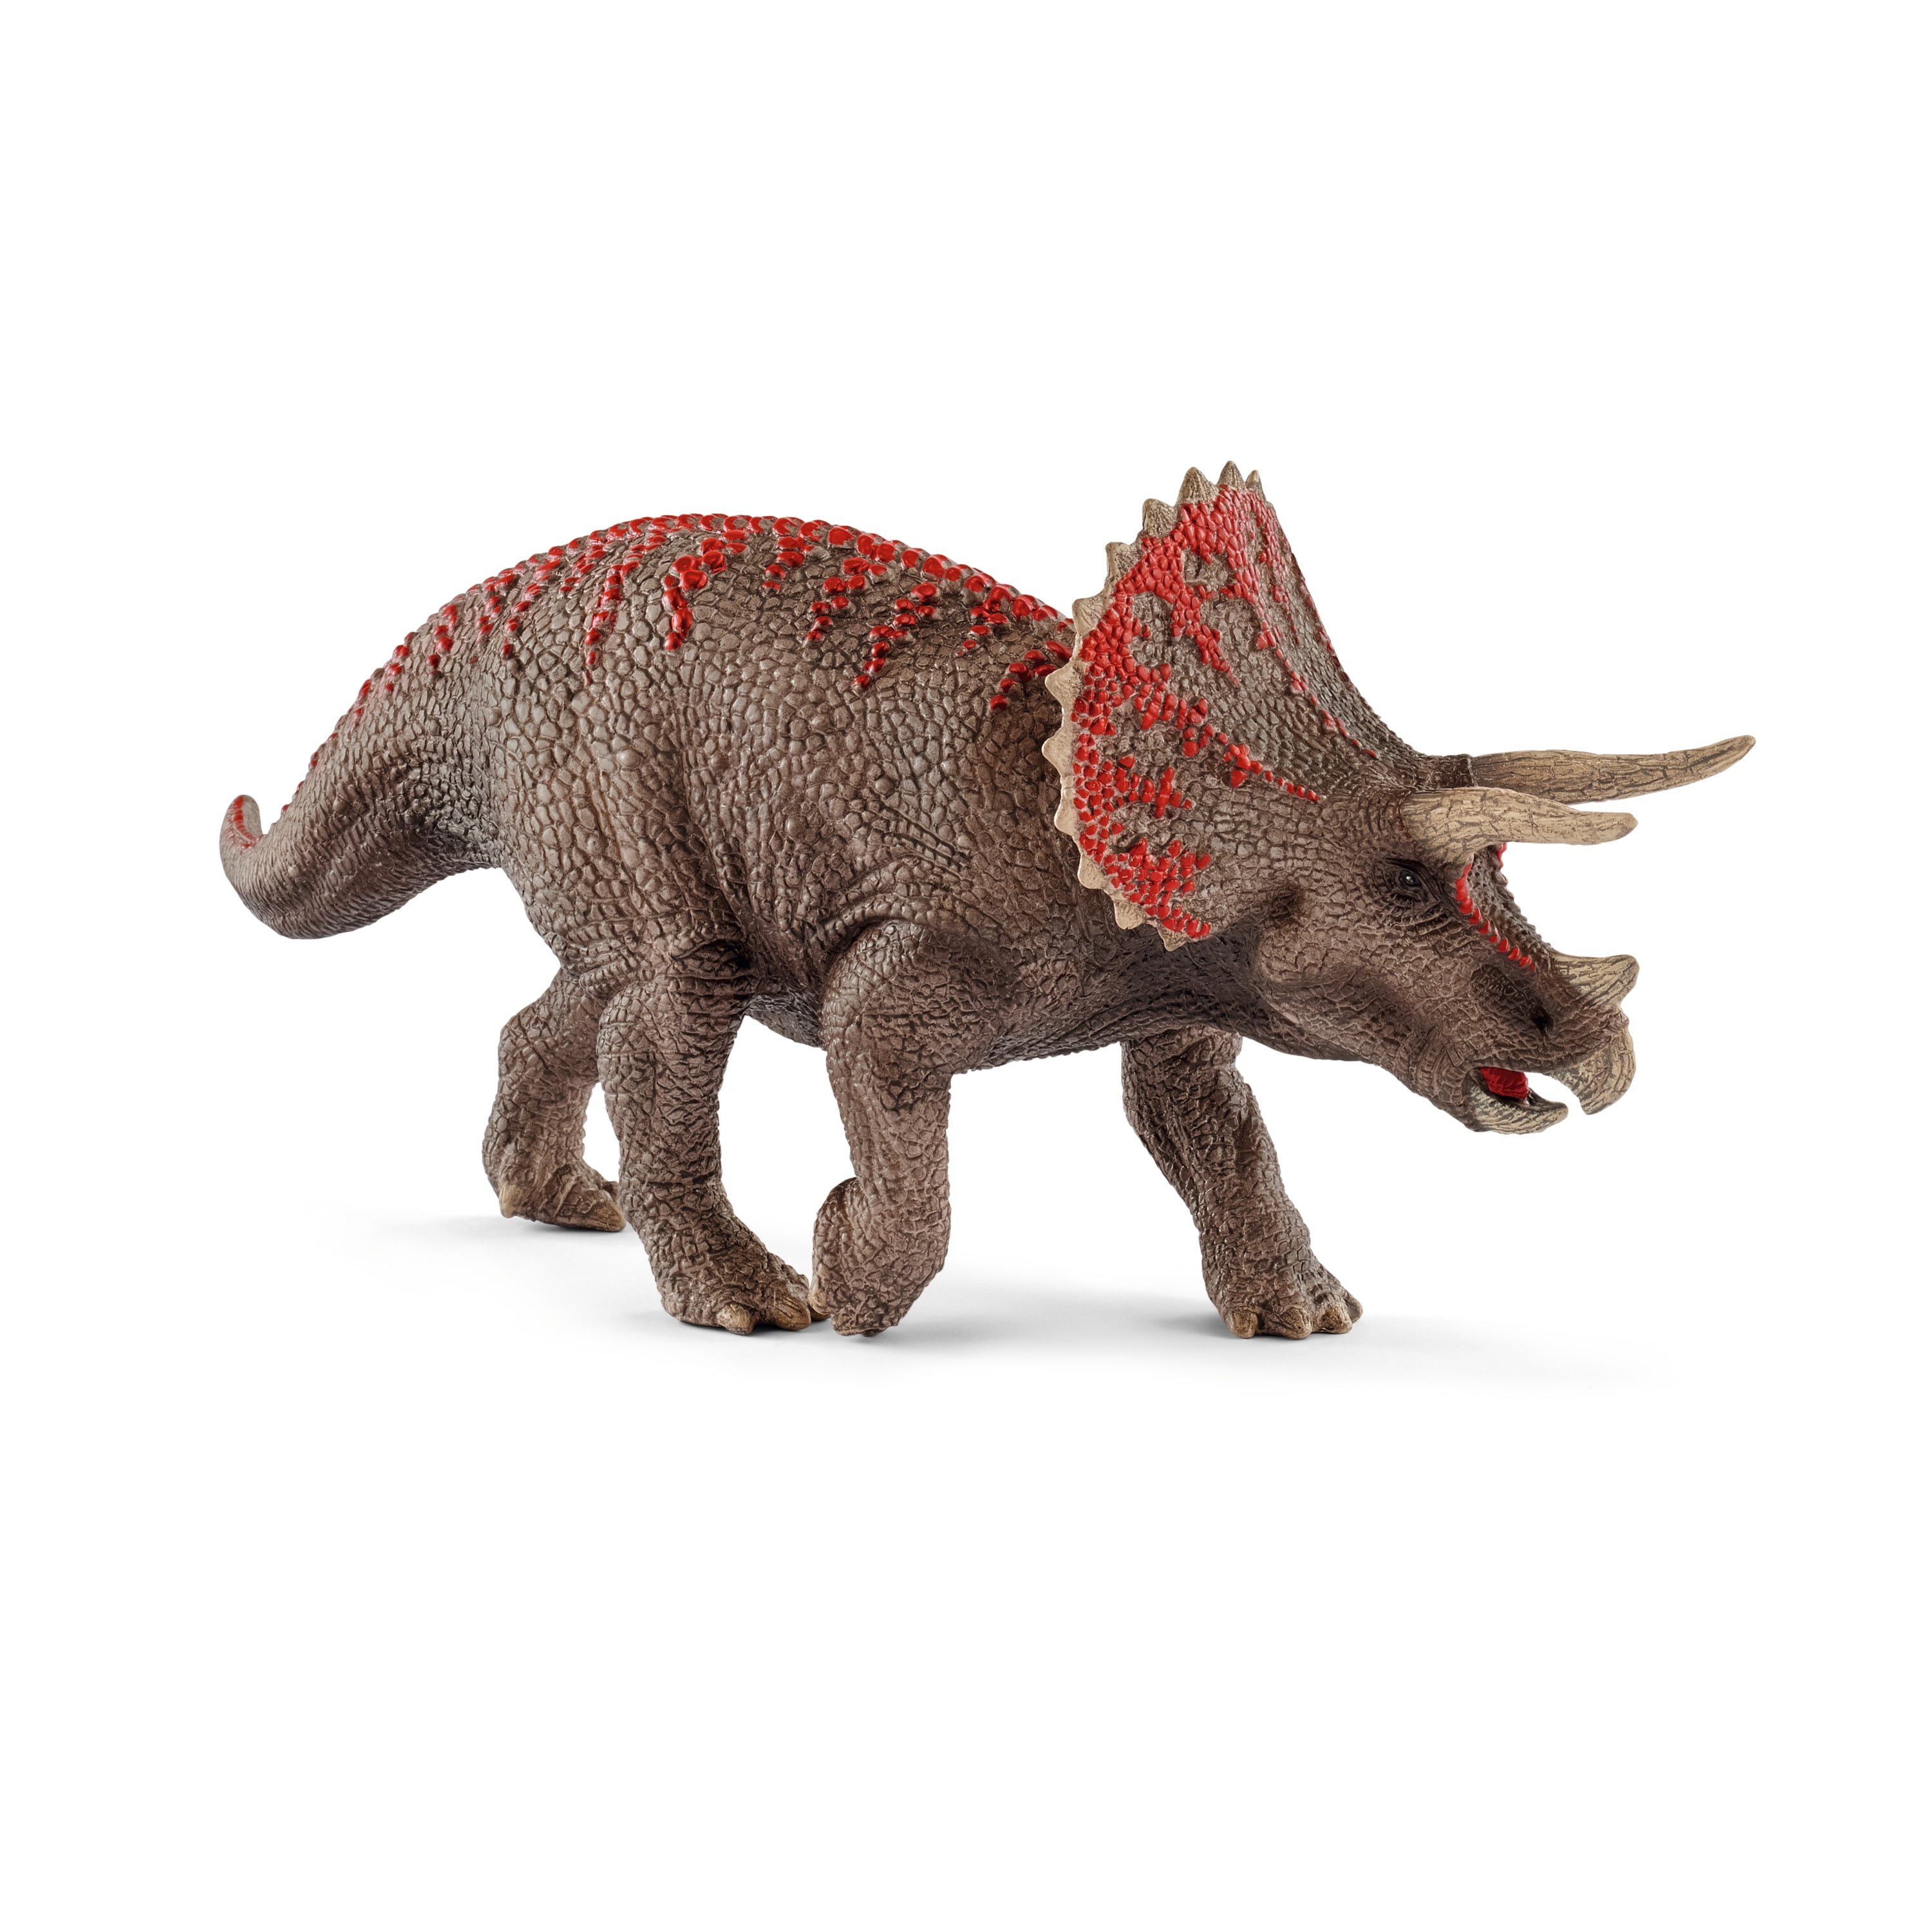 Dinosaur Soft Model Triceratops Figure Toy Gift Collectible 